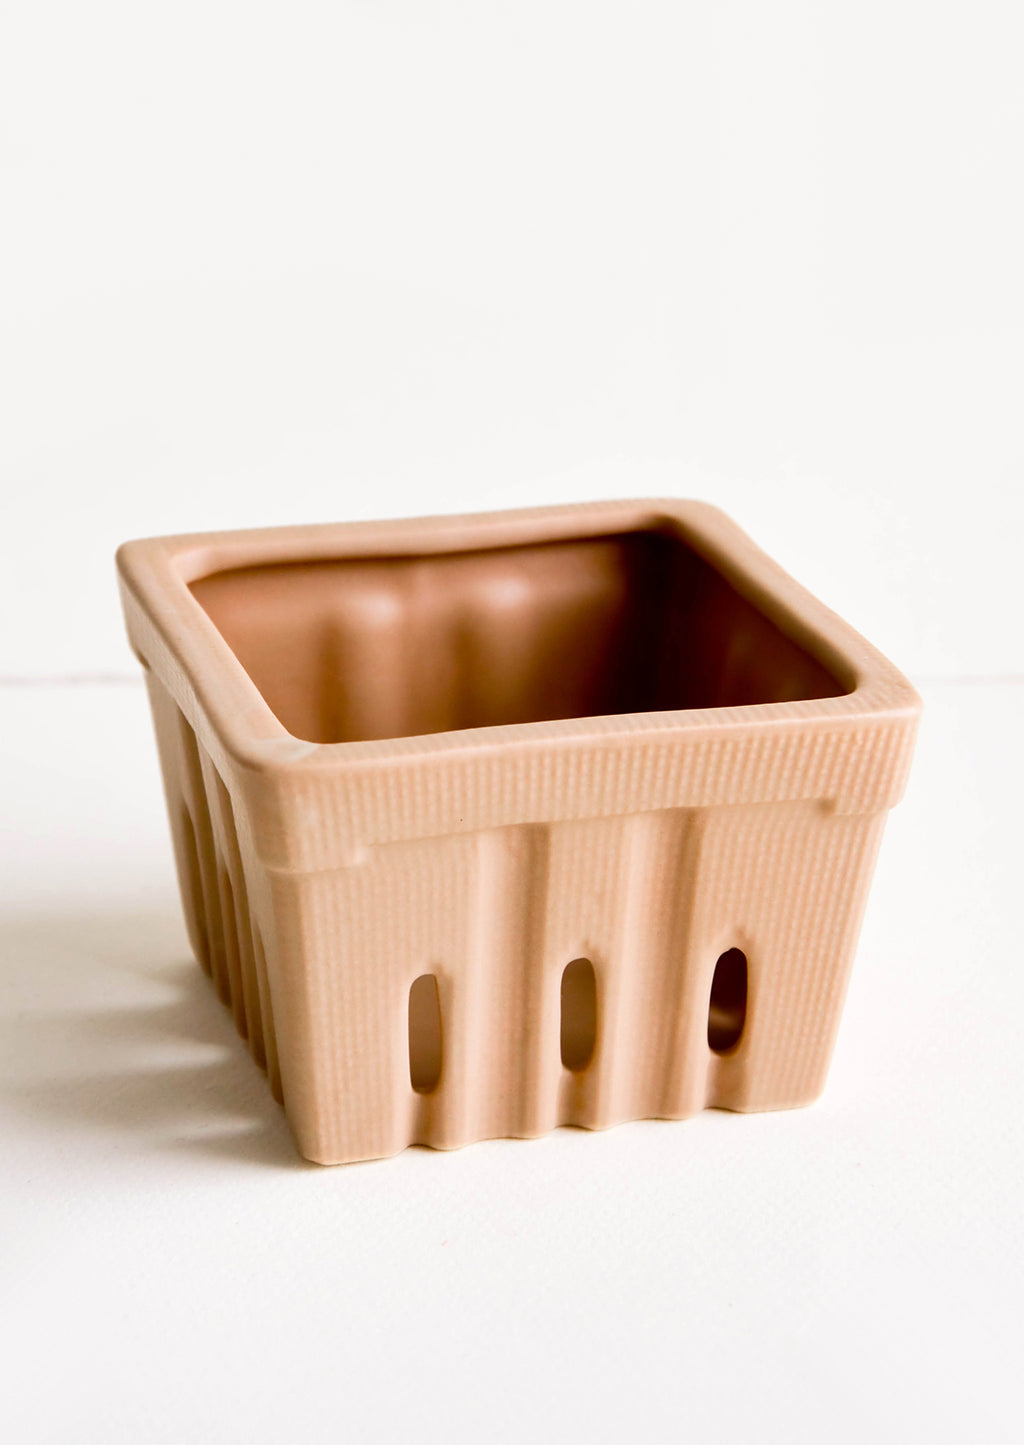 Cocoa: Ceramic basket in the style of disposable berry basket, shown in cocoa brown